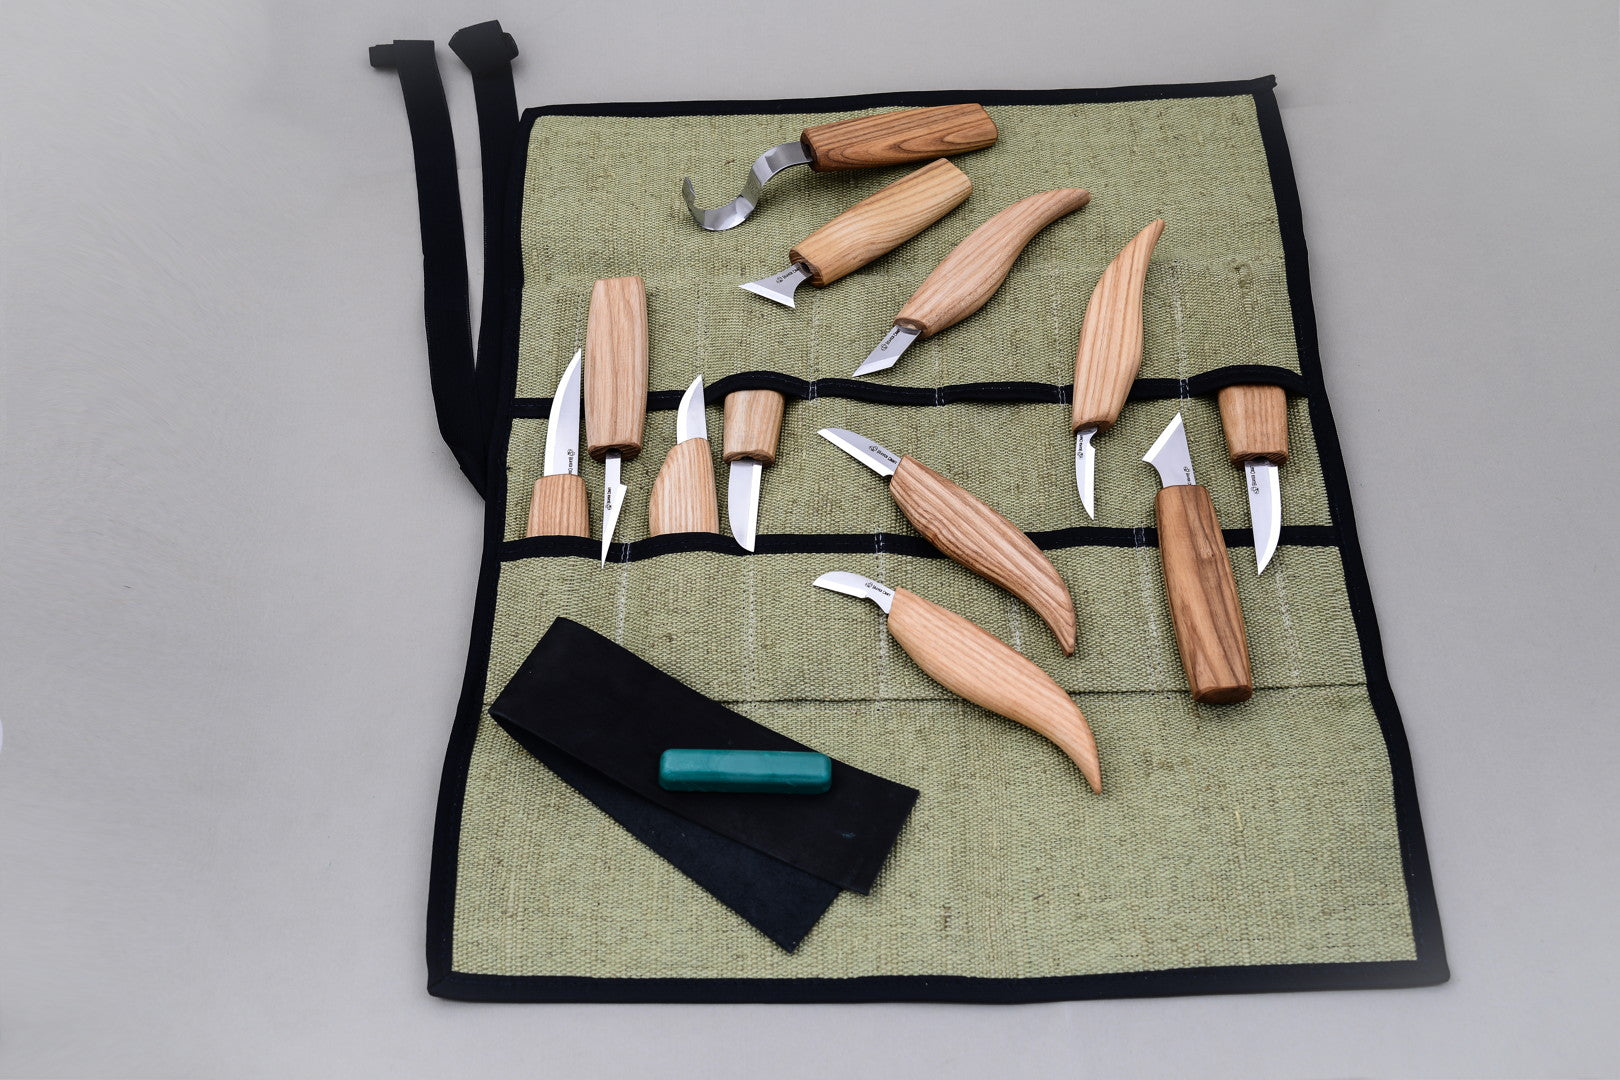 Buy S57L - Large left-handed Wood Carving Tool Set with 20 Tools